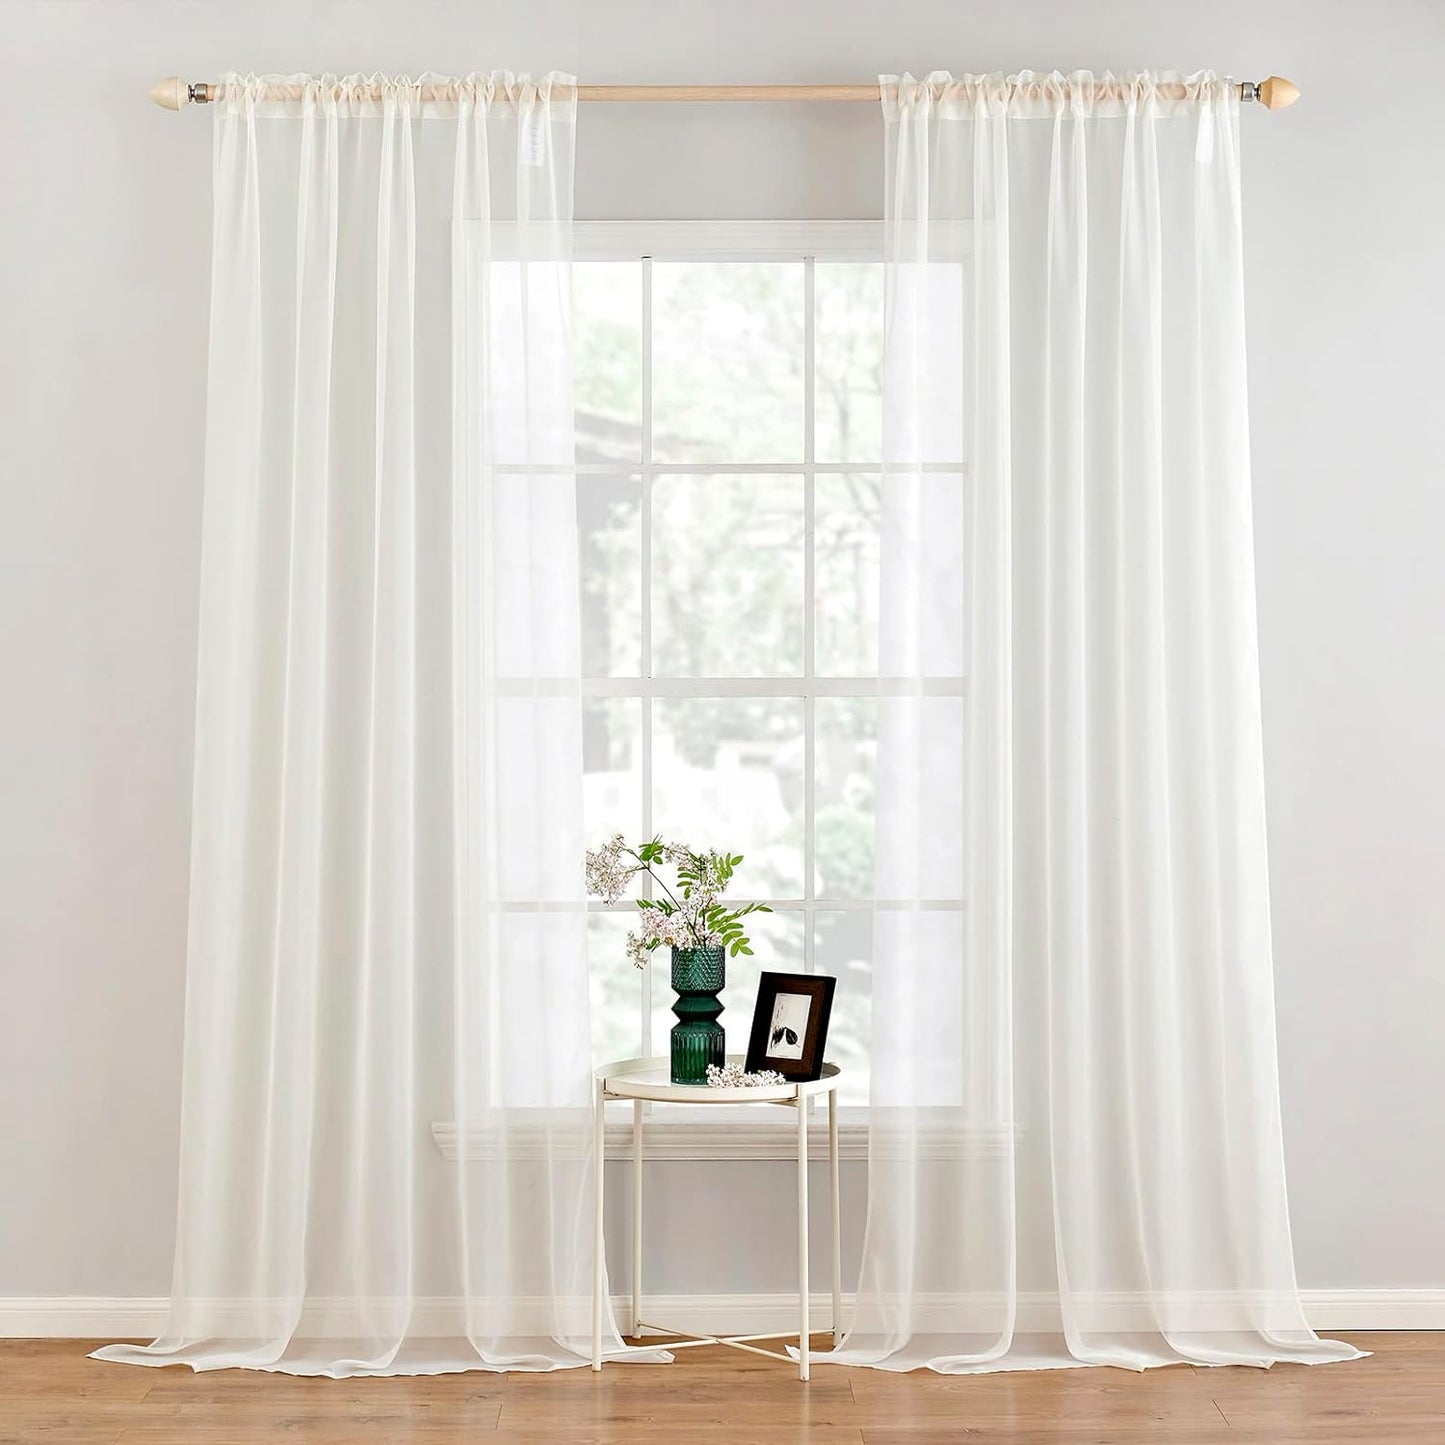 MIULEE White Sheer Curtains 96 Inches Long Window Curtains 2 Panels Solid Color Elegant Window Voile Panels/Drapes/Treatment for Bedroom Living Room (54 X 96 Inches White)  MIULEE Ivory 54''W X 120''L 